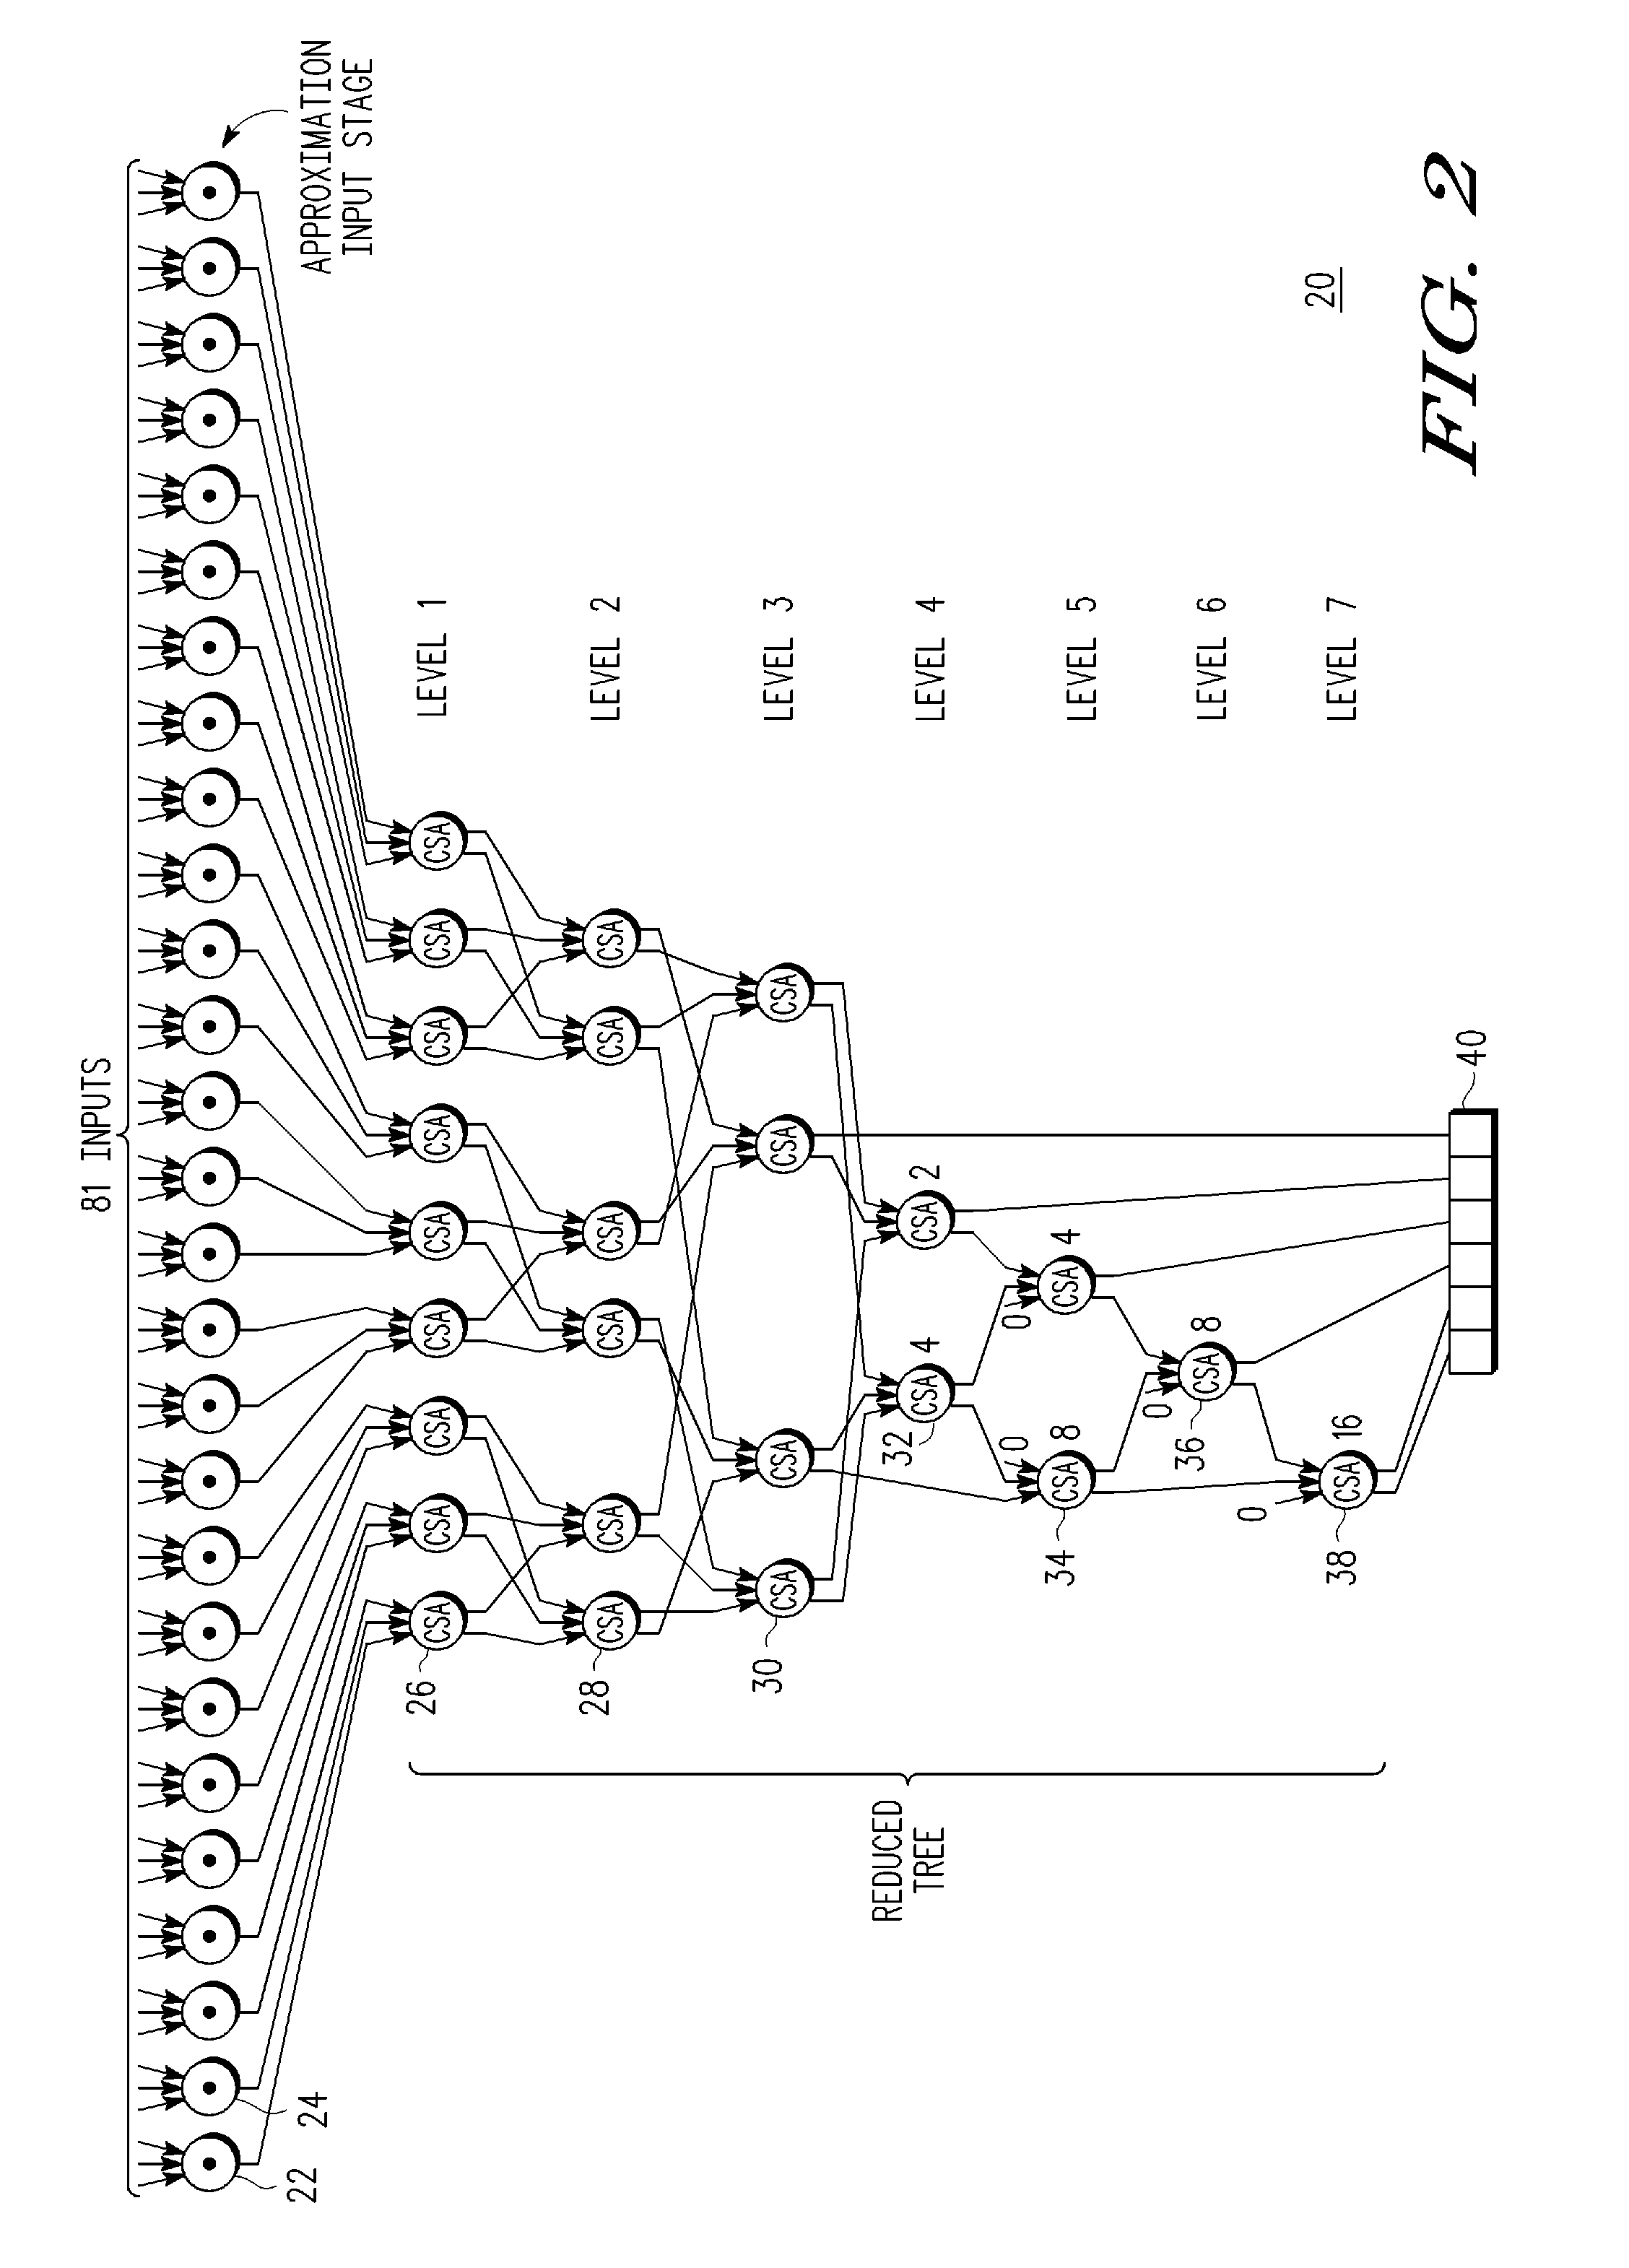 Population count approximation circuit and method thereof